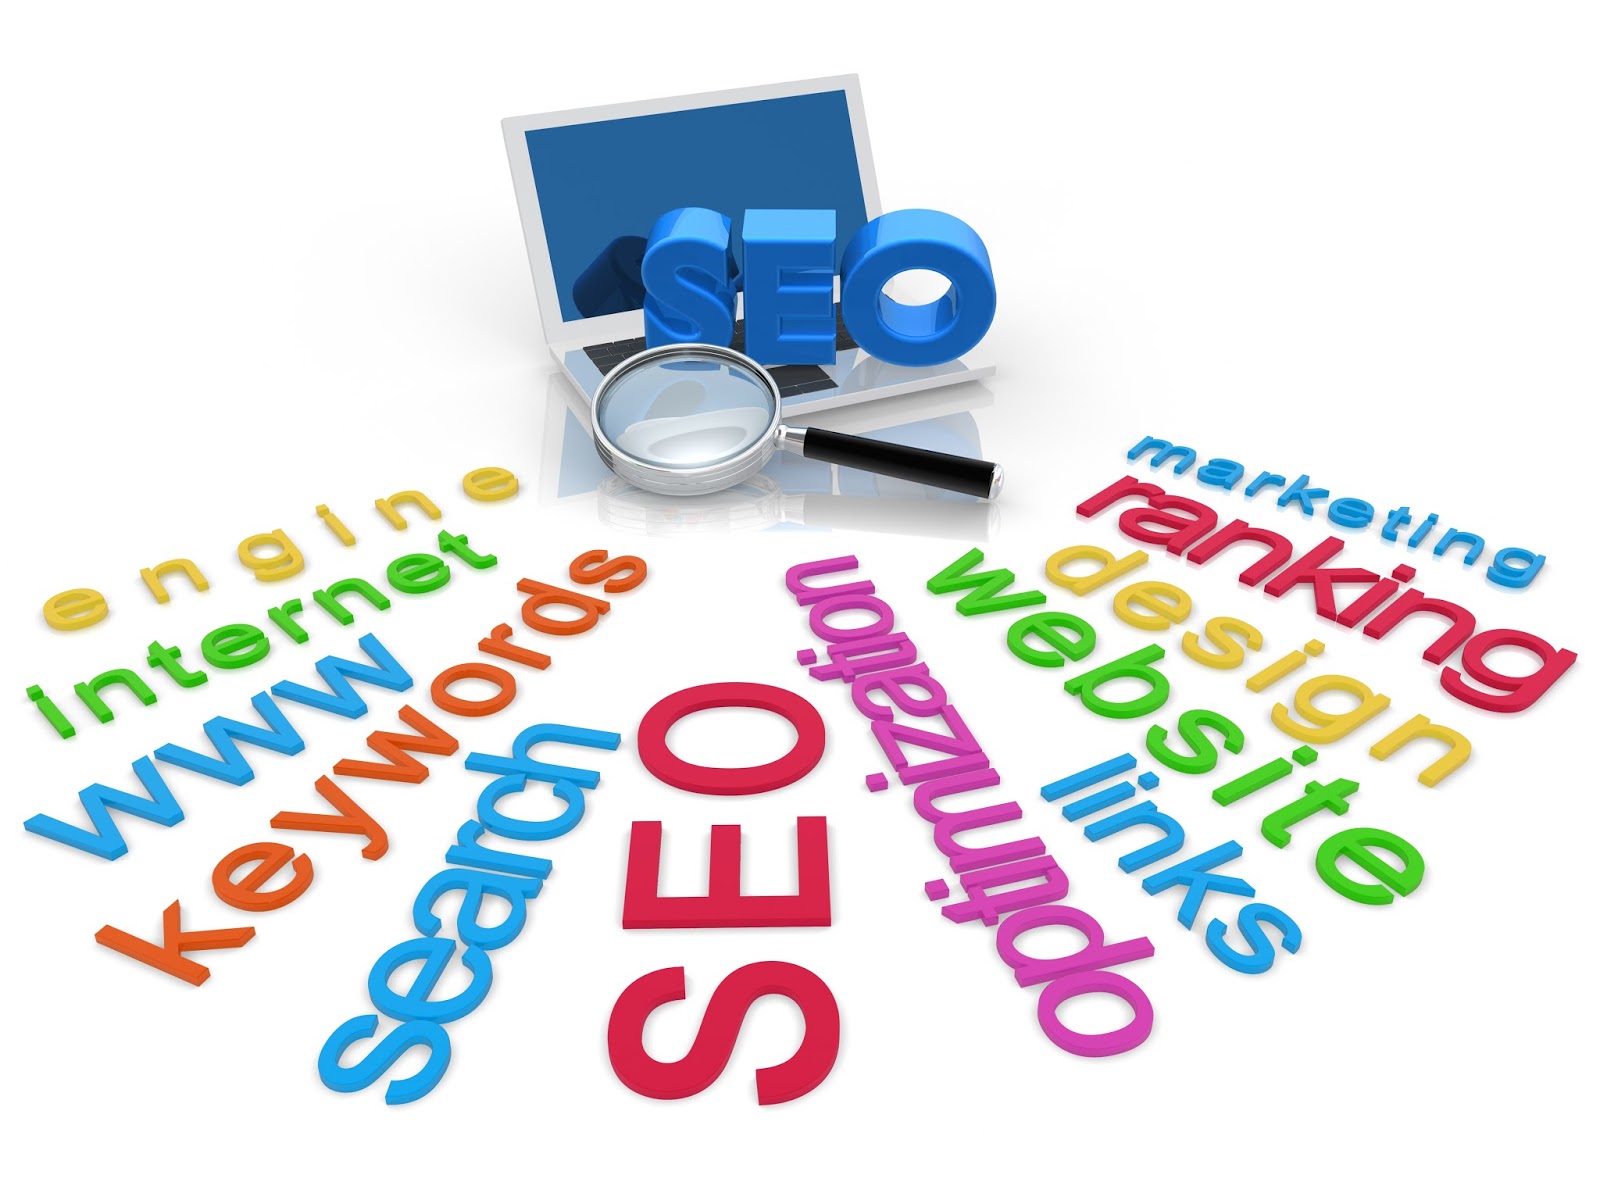 Search engines submission sites for SEO